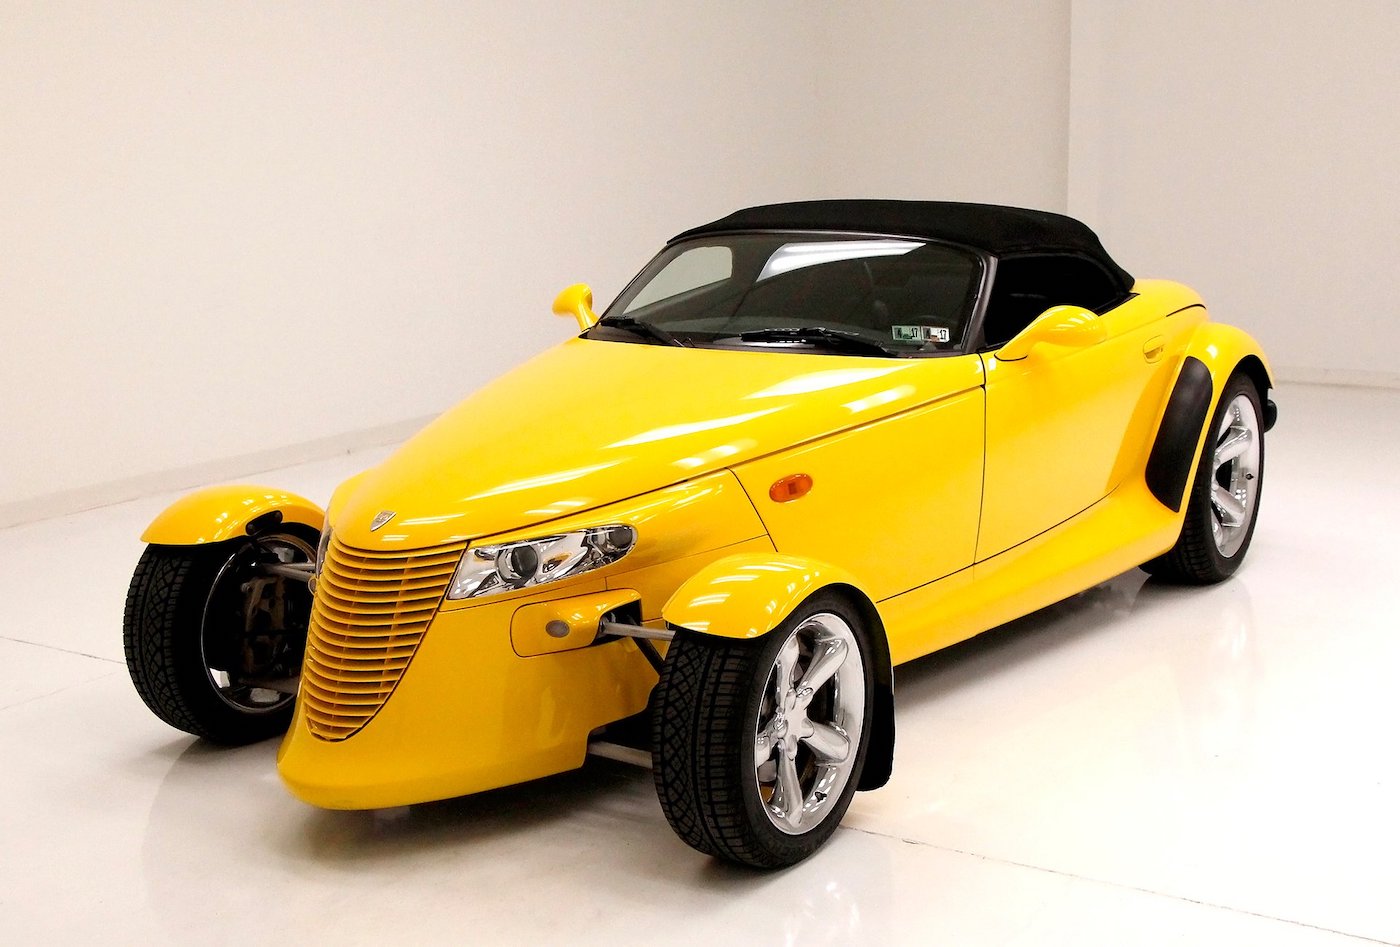 The Lana Turner of American Cars: Plymouth Prowler Roadster (1997-2001)